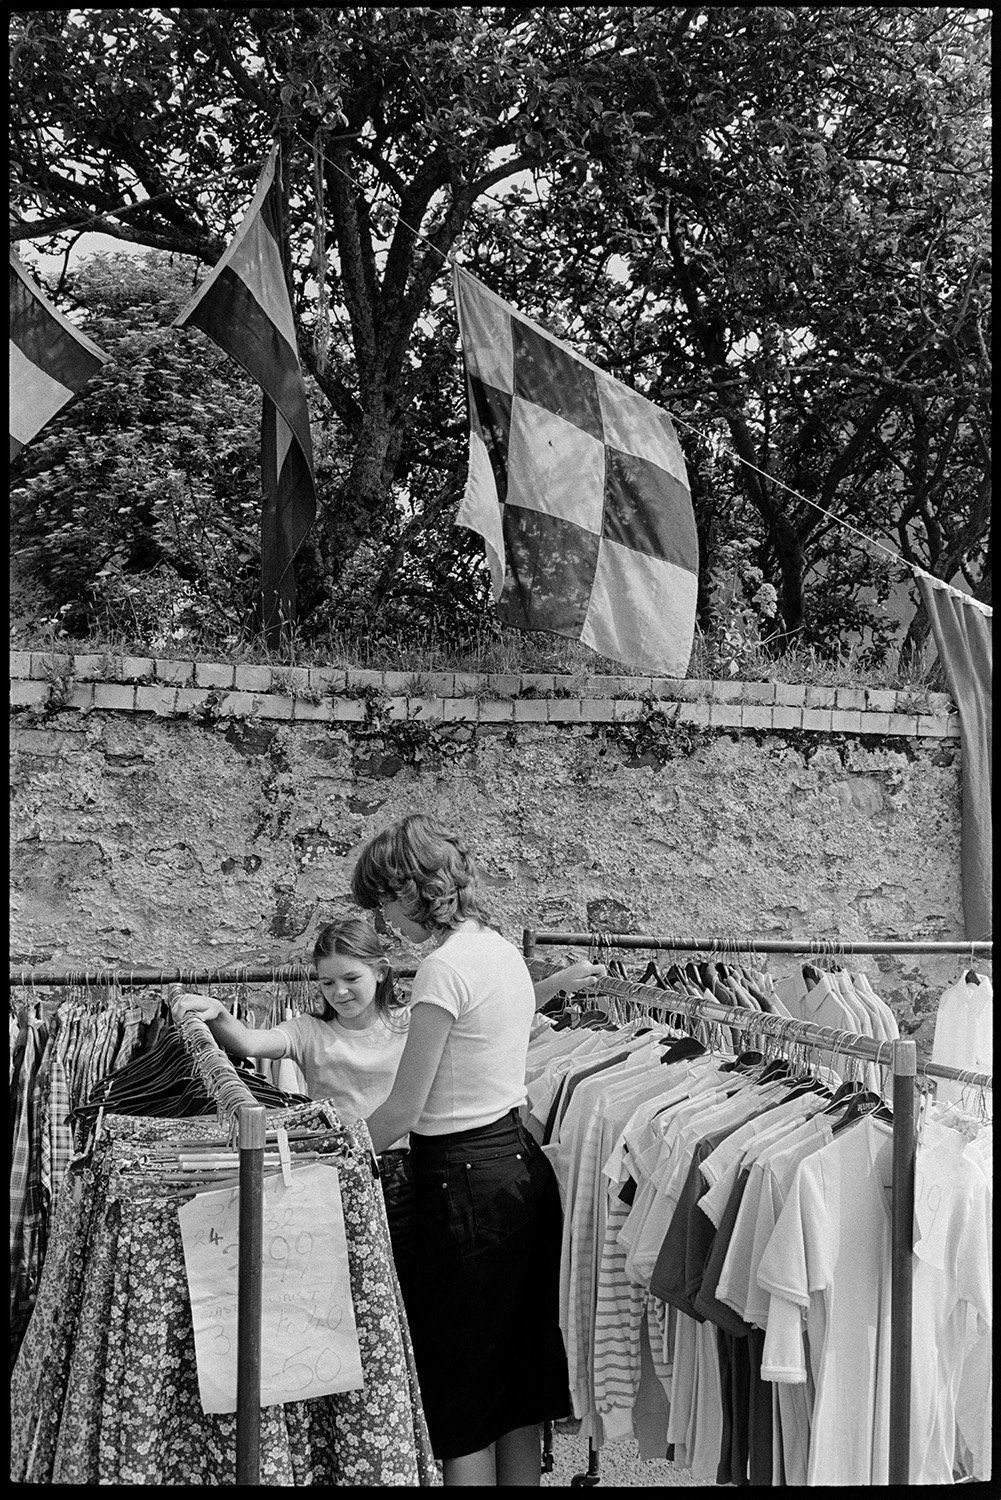 Open air market, village square part of festival, stalls, flags, crafts, books, plants. 
[A woman and child looking at a clothes stall at Dolton Festival or open air market. Flags are hung up from a tree behind a wall in the background.]